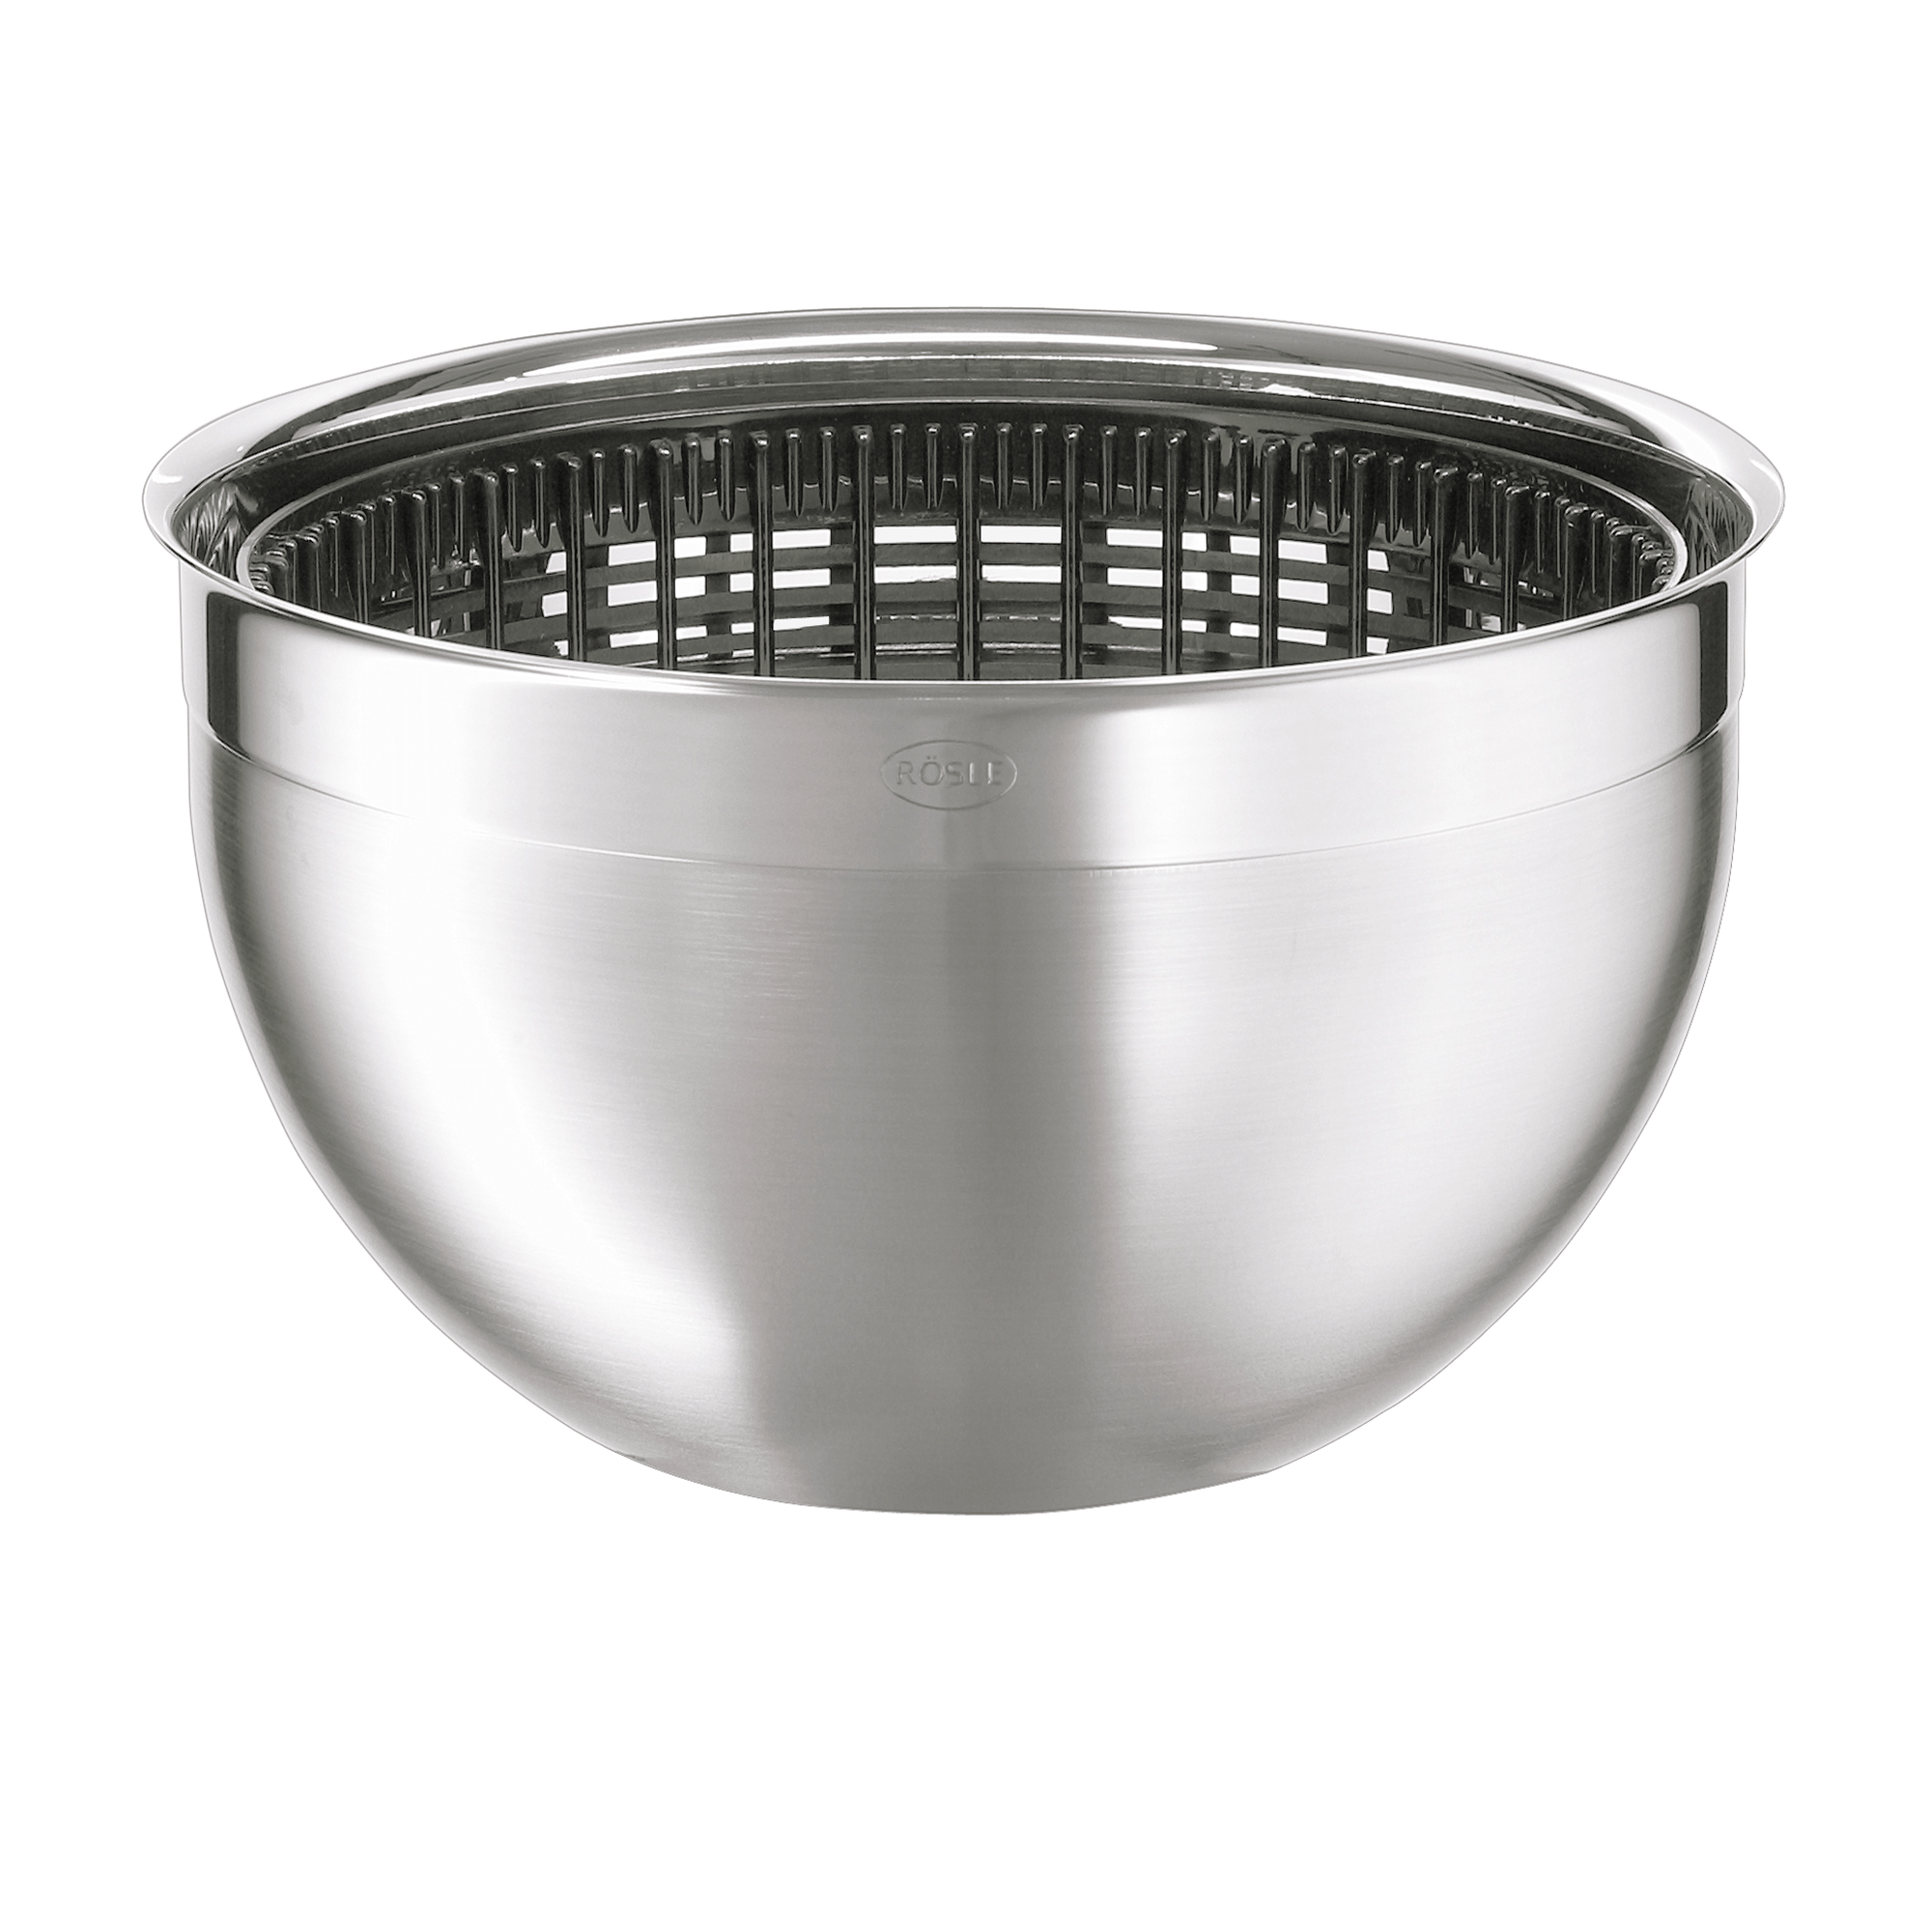 Salad Spinner with glass lid Ø 24 cm|9.5 in.